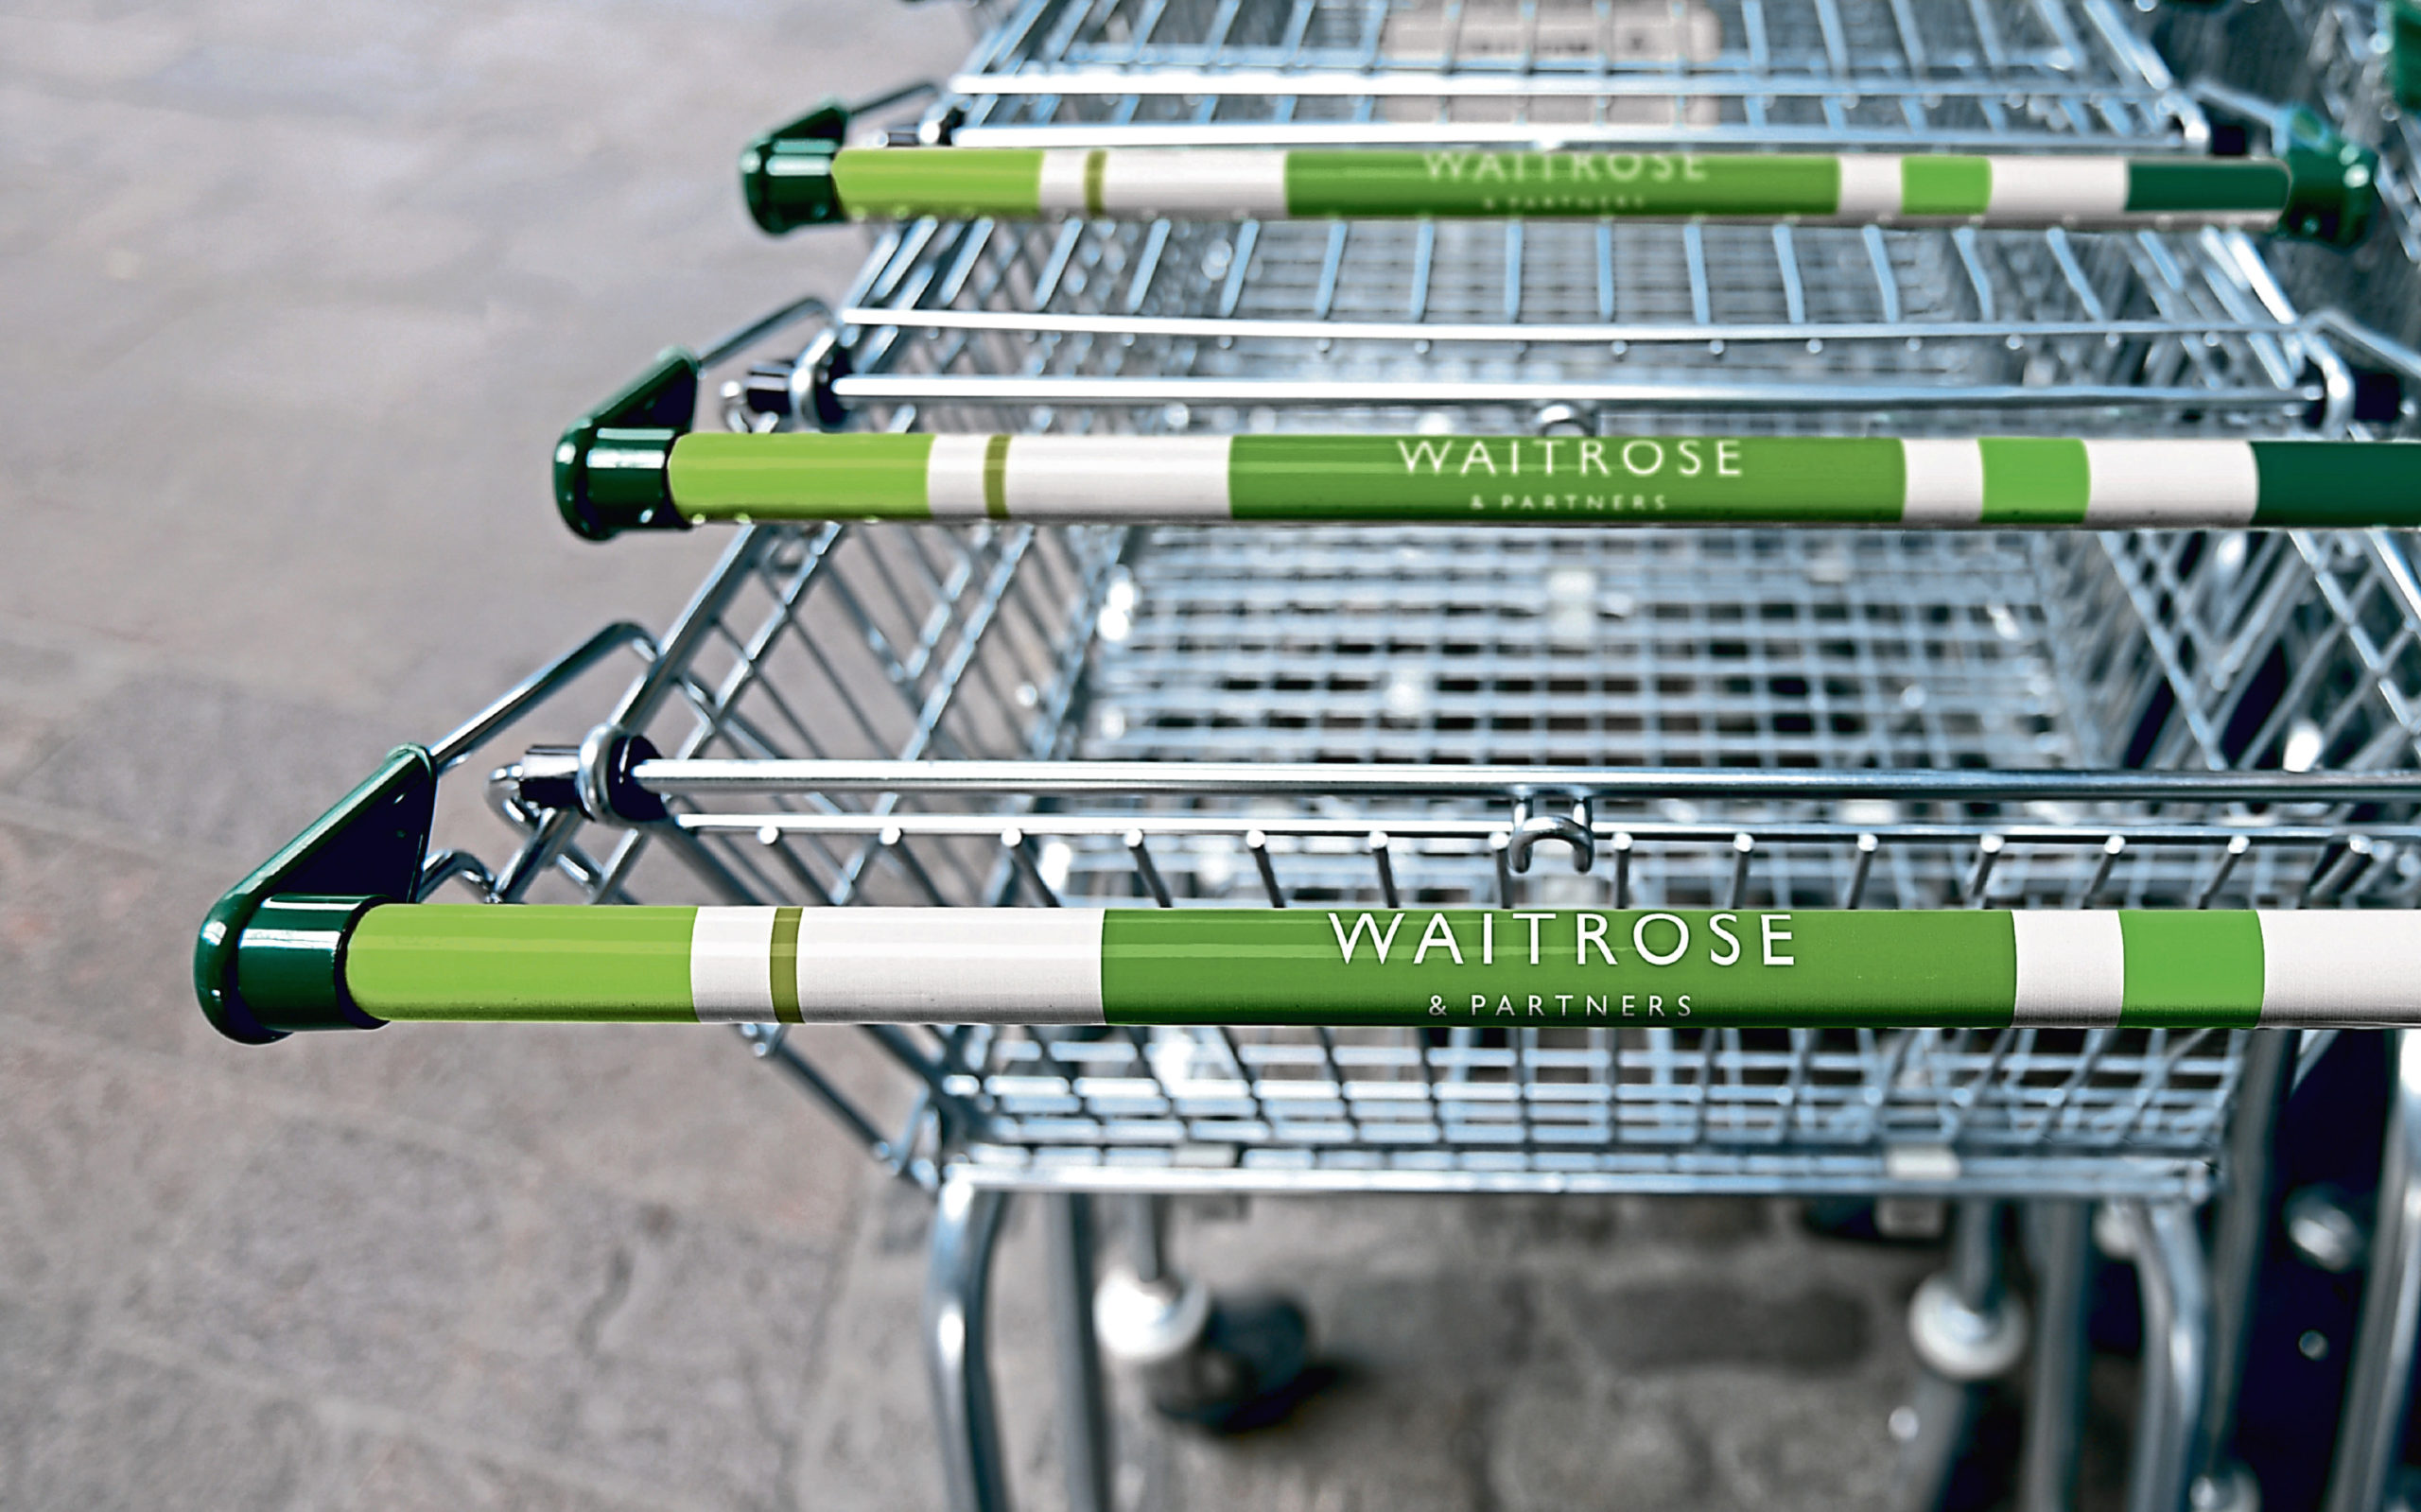 Waitrose’s agriculture team says the system could be used as a marketing tool in future.